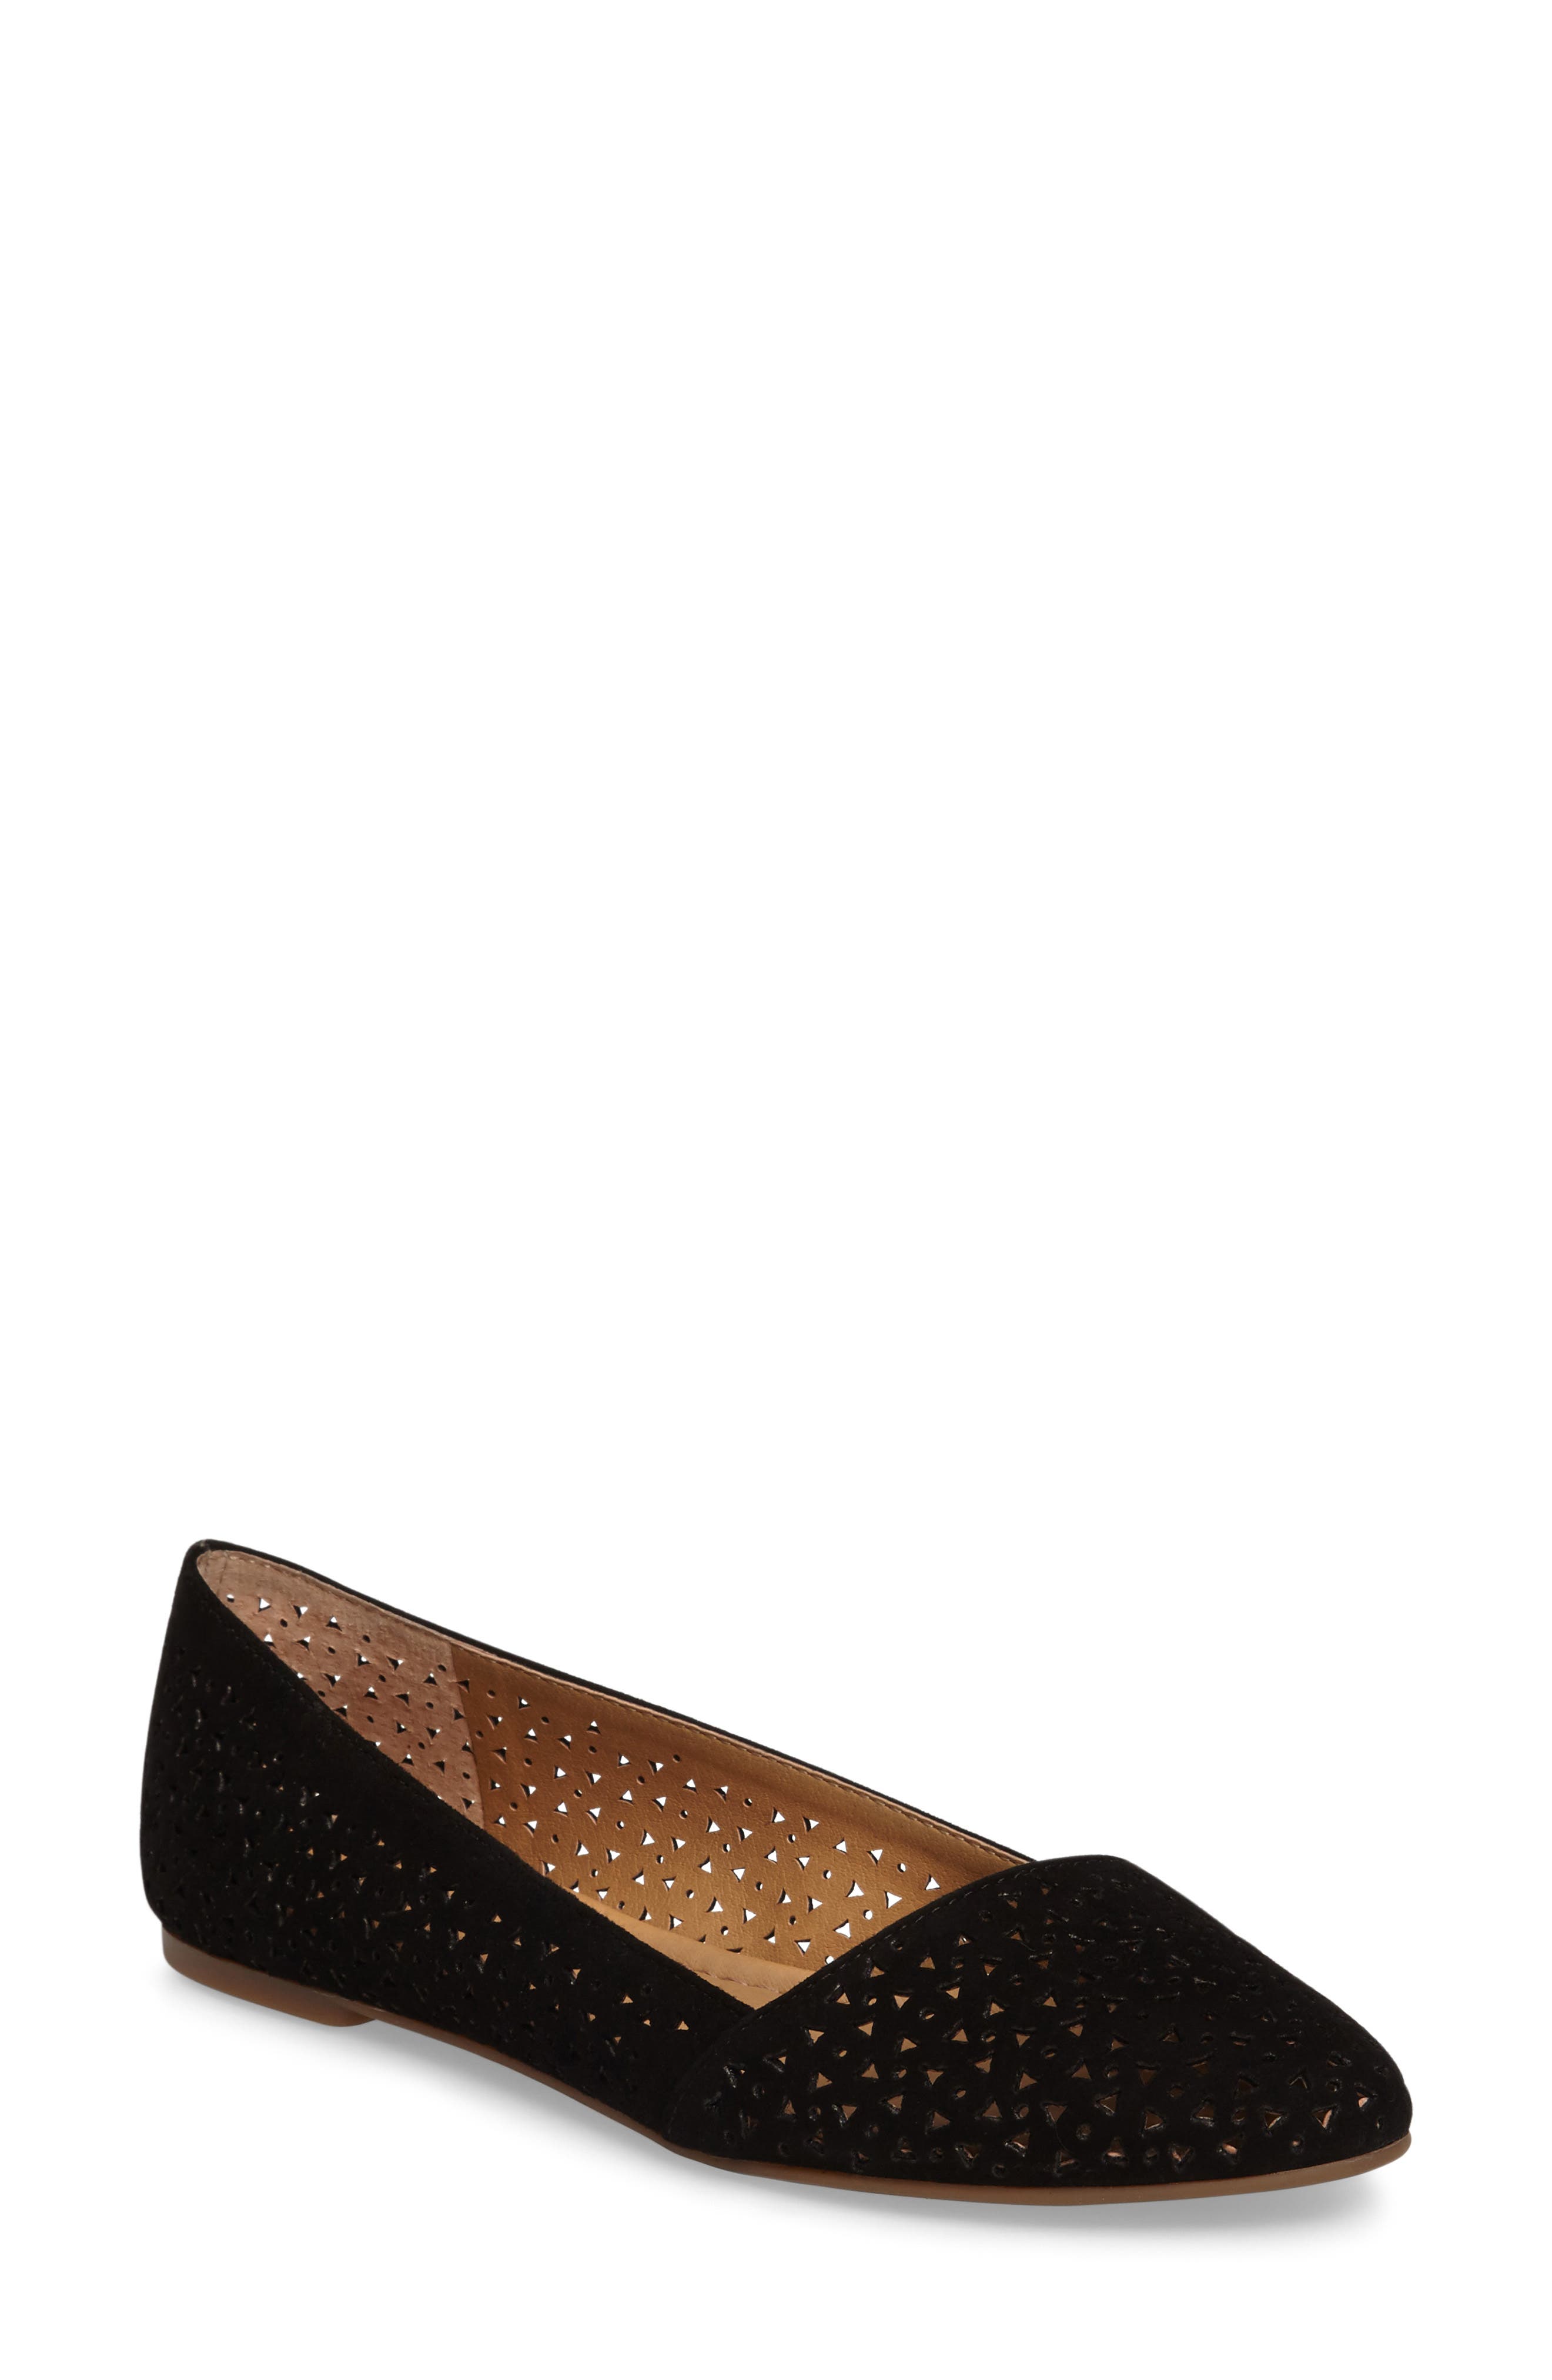 lucky brand perforated flats